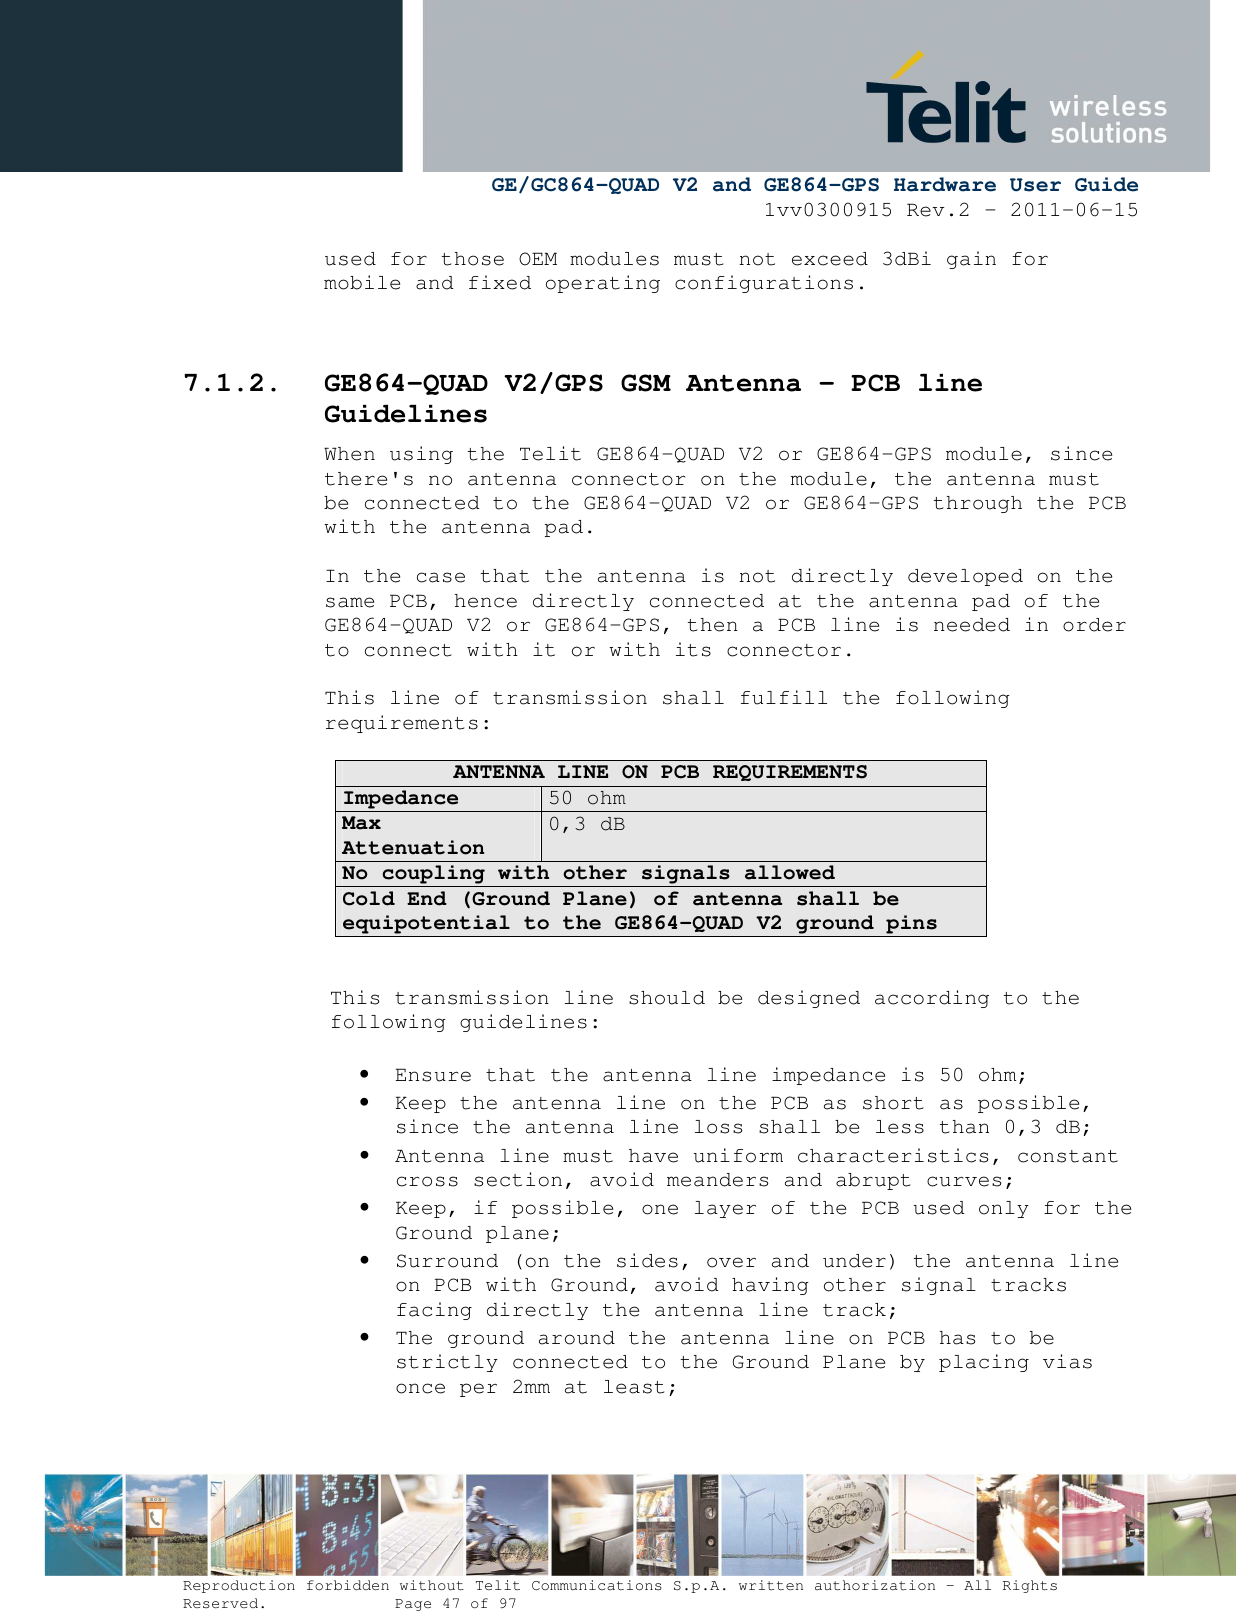      GE/GC864-QUAD V2 and GE864-GPS Hardware User Guide 1vv0300915 Rev.2 – 2011-06-15  Reproduction forbidden without Telit Communications S.p.A. written authorization - All Rights Reserved.    Page 47 of 97  used for those OEM modules must not exceed 3dBi gain for mobile and fixed operating configurations.   7.1.2. GE864-QUAD V2/GPS GSM Antenna – PCB line Guidelines When using the Telit GE864-QUAD V2 or GE864-GPS module, since there&apos;s no antenna connector on the module, the antenna must be connected to the GE864-QUAD V2 or GE864-GPS through the PCB with the antenna pad.  In the case that the antenna is not directly developed on the same PCB, hence directly connected at the antenna pad of the GE864-QUAD V2 or GE864-GPS, then a PCB line is needed in order to connect with it or with its connector.   This line of transmission shall fulfill the following requirements:  ANTENNA LINE ON PCB REQUIREMENTS Impedance 50 ohm Max Attenuation  0,3 dB No coupling with other signals allowed Cold End (Ground Plane) of antenna shall be equipotential to the GE864-QUAD V2 ground pins   This transmission line should be designed according to the following guidelines:  • Ensure that the antenna line impedance is 50 ohm; • Keep the antenna line on the PCB as short as possible, since the antenna line loss shall be less than 0,3 dB; • Antenna line must have uniform characteristics, constant cross section, avoid meanders and abrupt curves; • Keep, if possible, one layer of the PCB used only for the Ground plane; • Surround (on the sides, over and under) the antenna line on PCB with Ground, avoid having other signal tracks facing directly the antenna line track; • The ground around the antenna line on PCB has to be strictly connected to the Ground Plane by placing vias once per 2mm at least; 